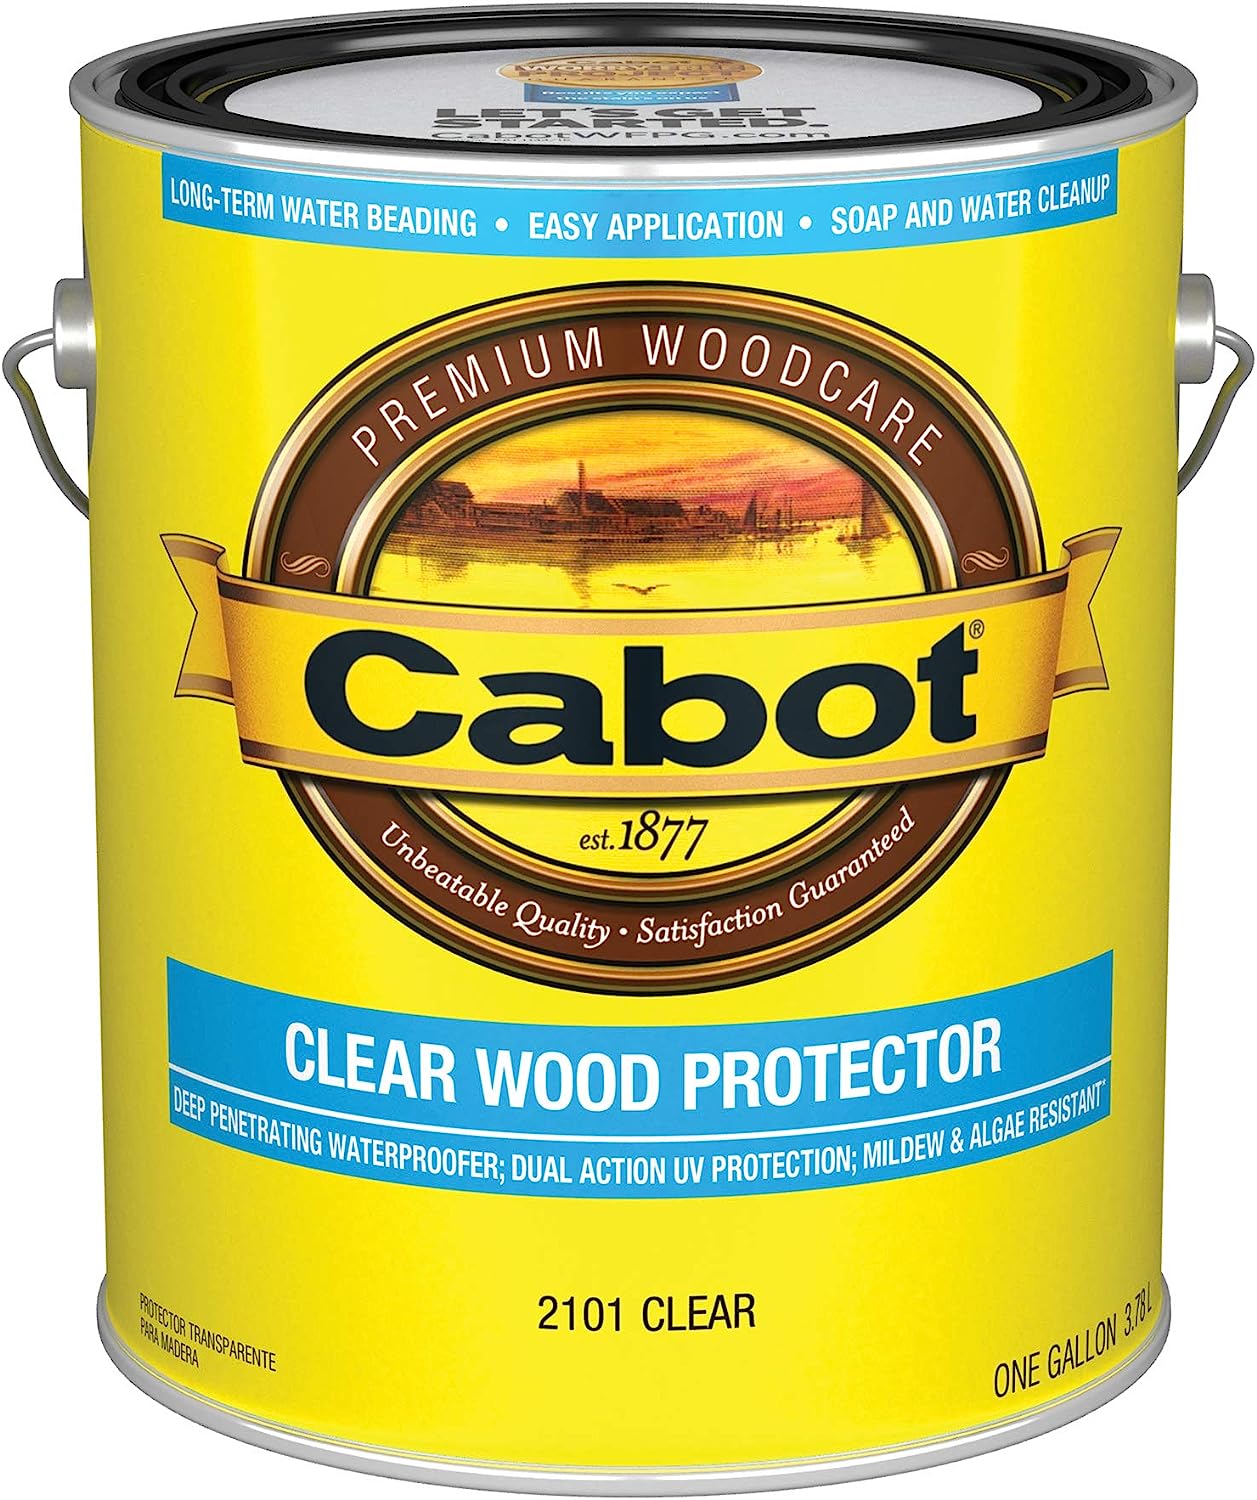 Cabot 140.0002101.007 Clear Wood Protector, Clear, 1 Gallon